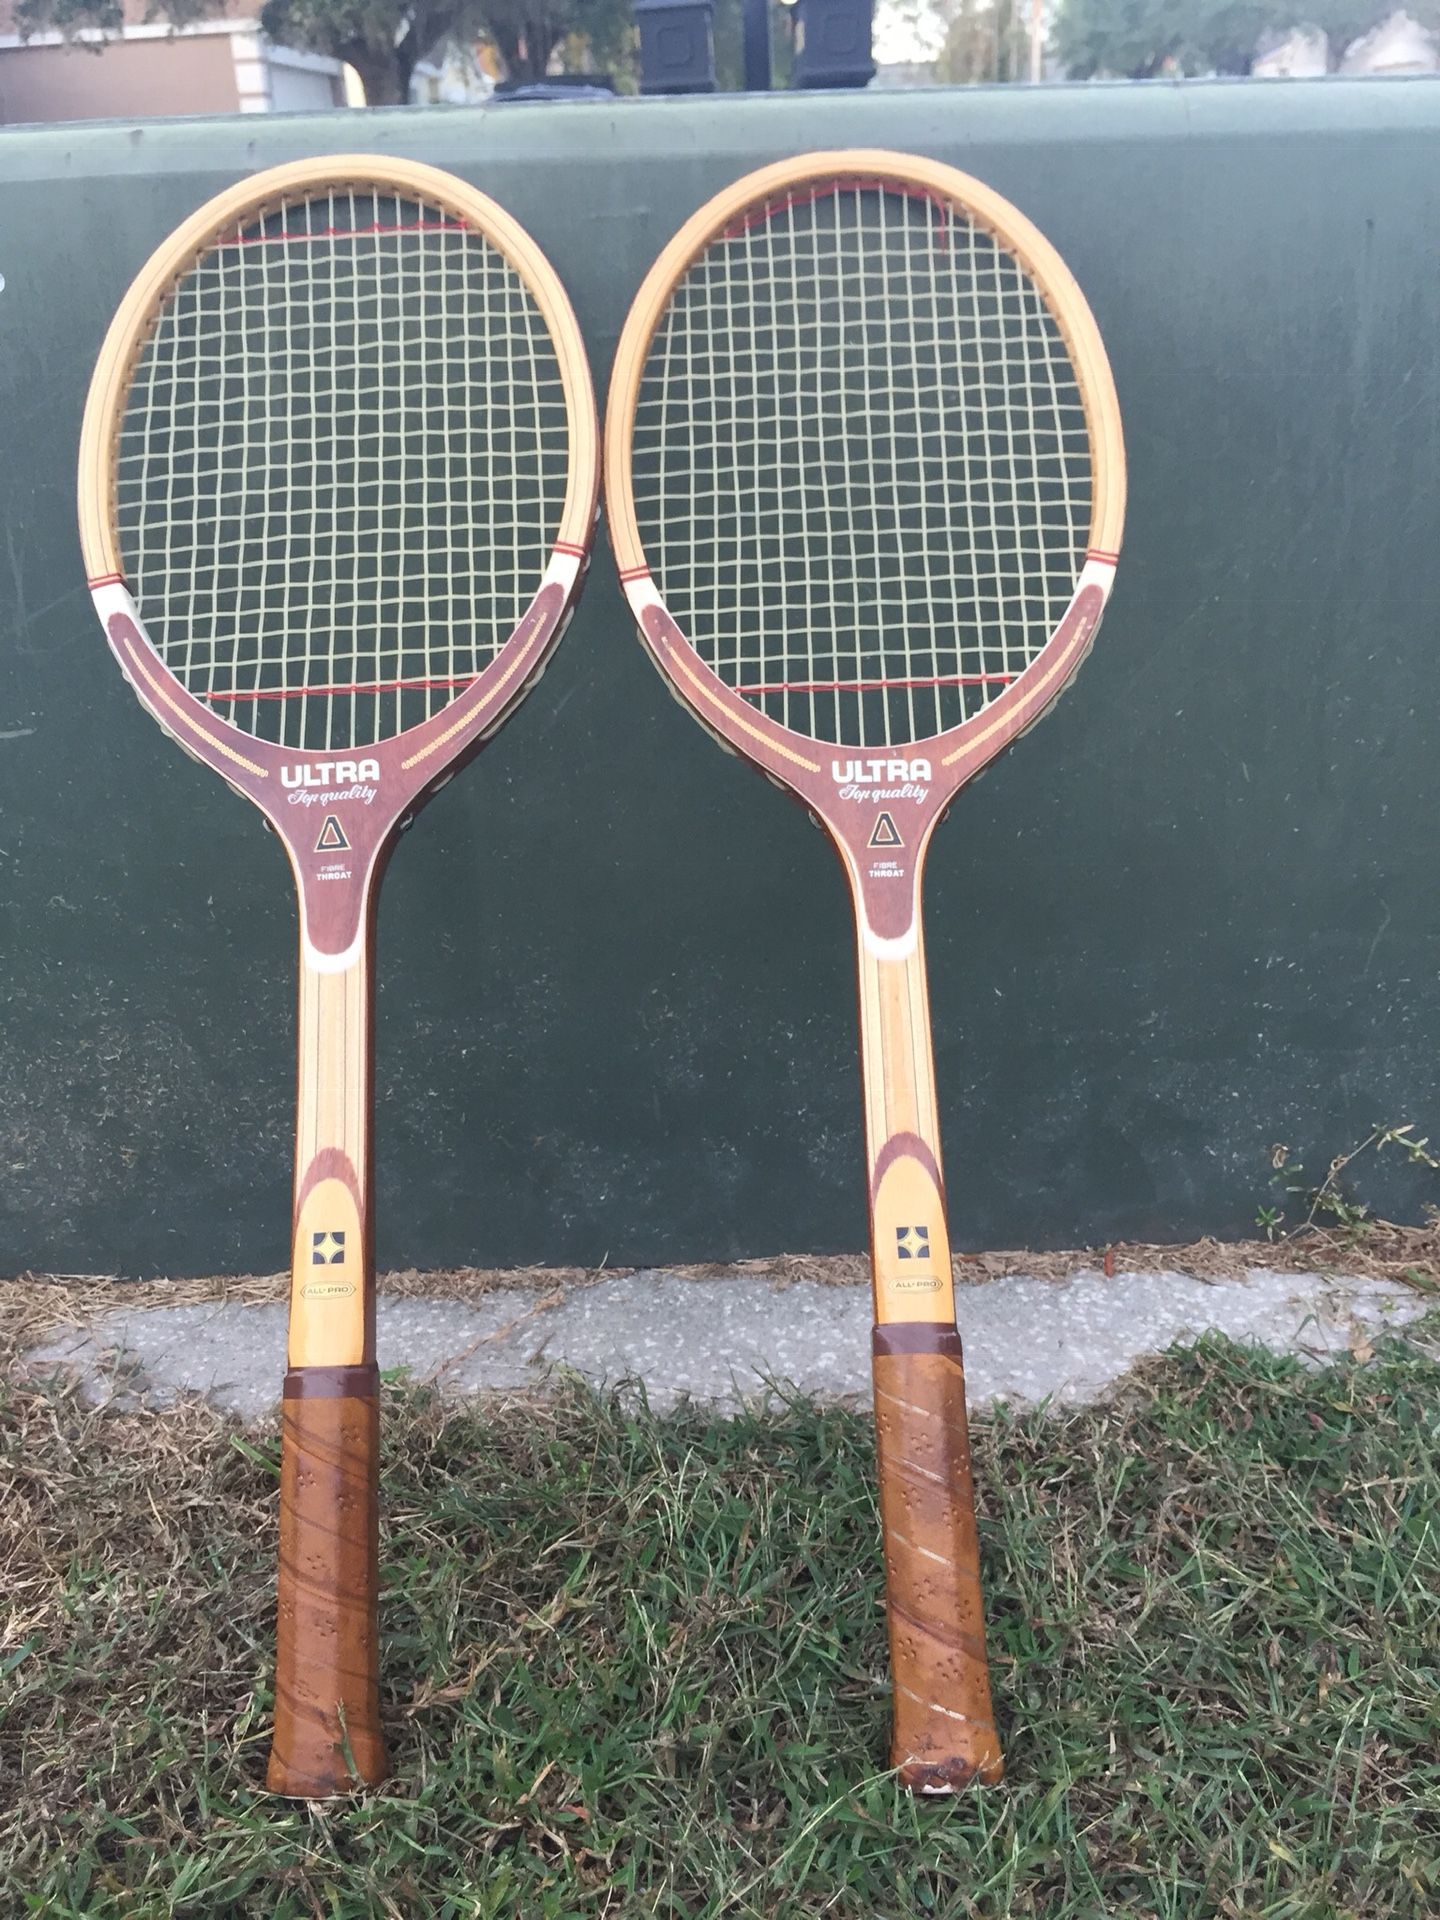 SSK Wood Tennis Rackets Racquets Ultra Top Quality models